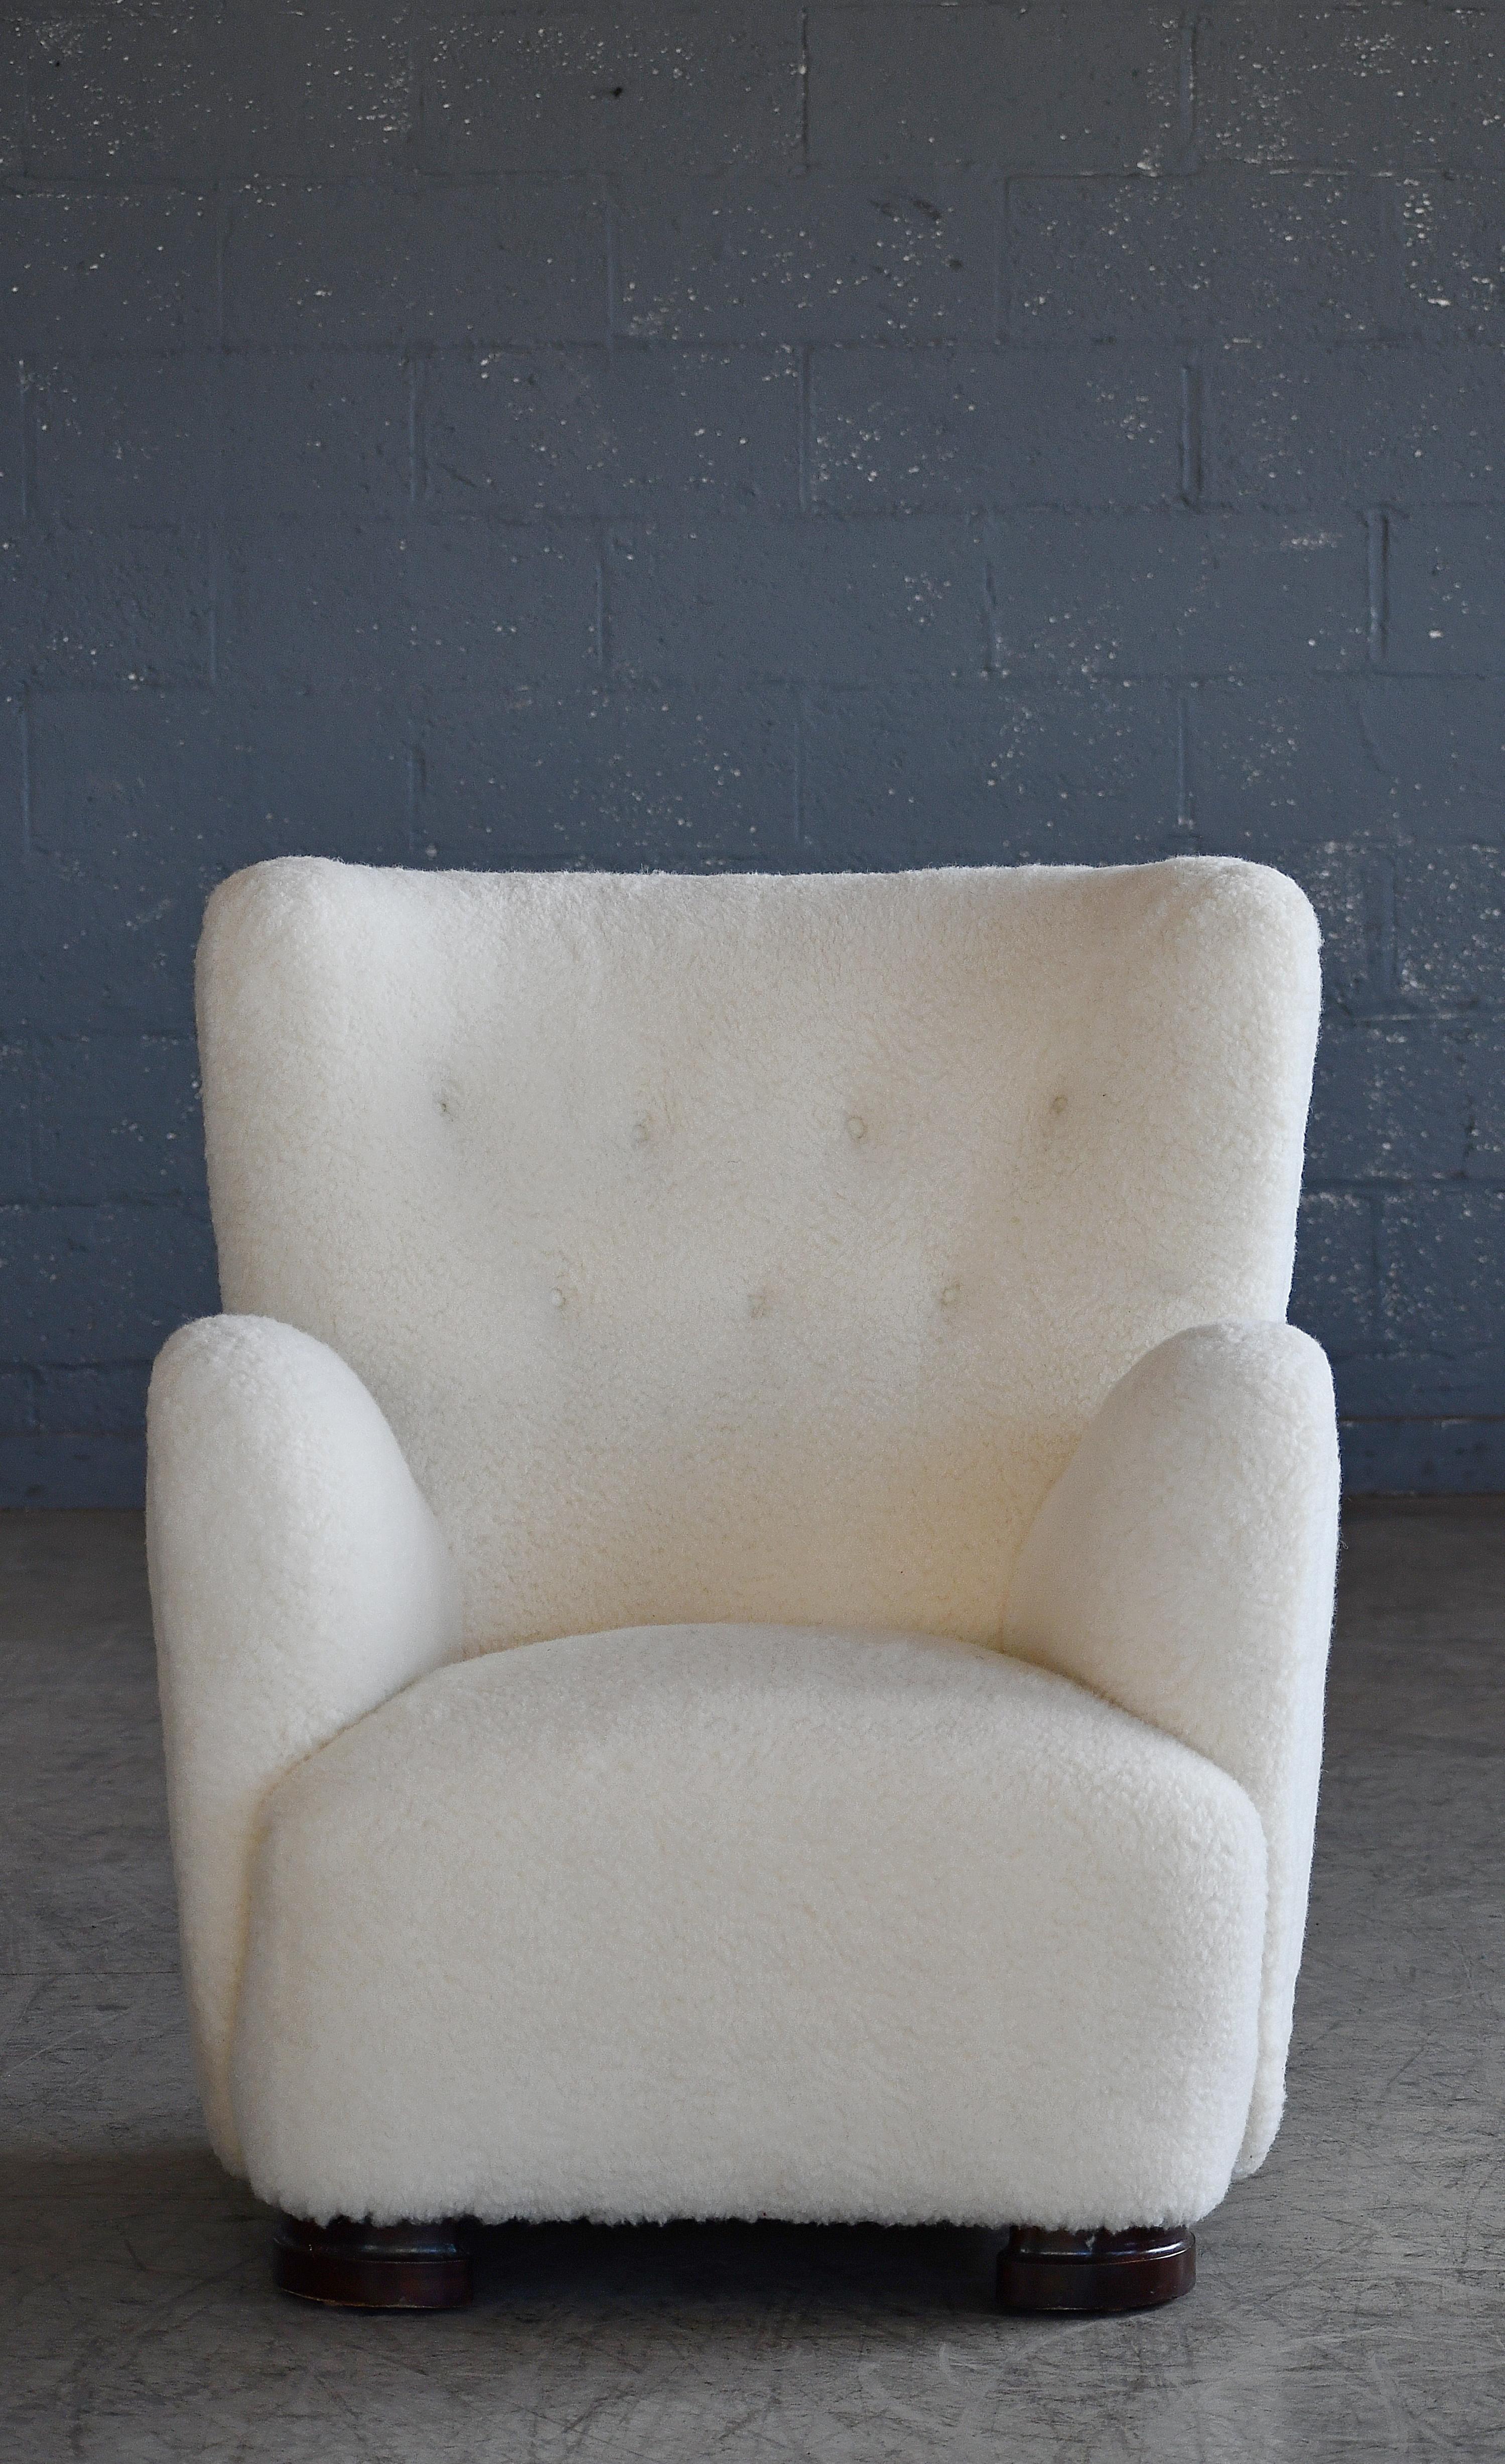 Fritz Hansen attributed 1940s Danish highback lounge chair in Lambswool. Sublime highback lounge chair with channeled backrest made in Denmark in the late 1930s or early 1940s. This model chair is seen from time to time in the Danish market and is